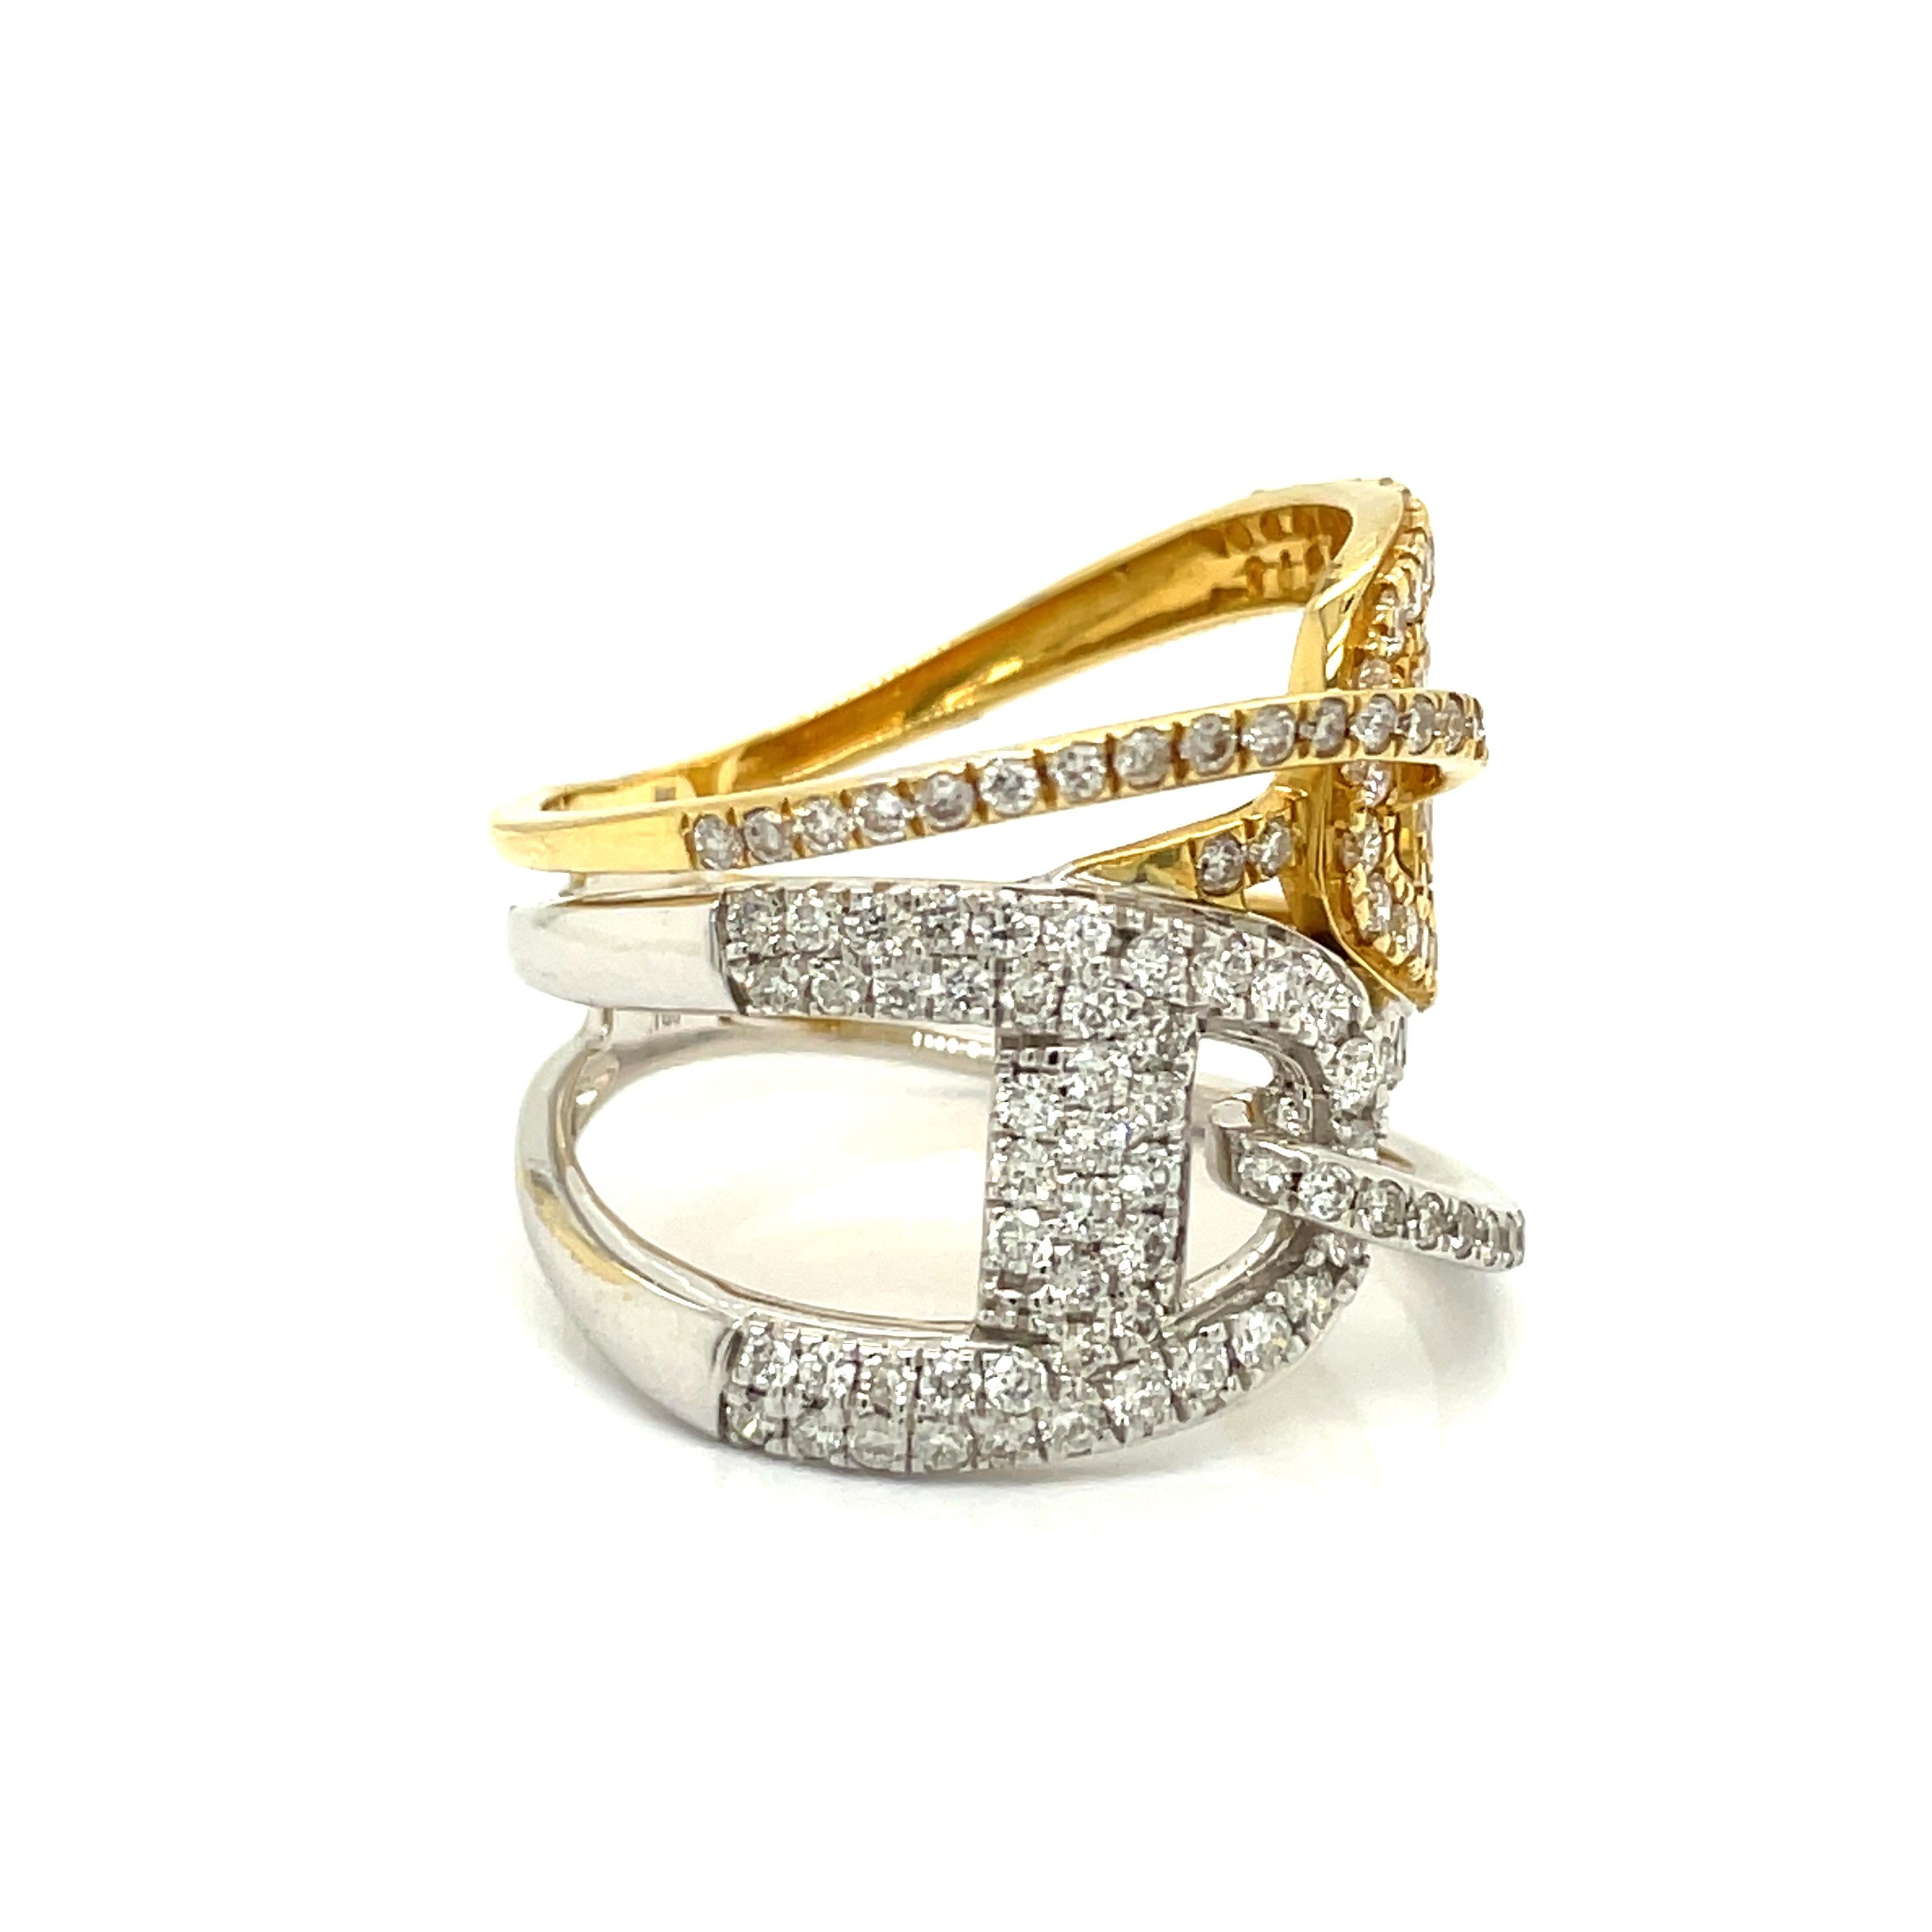 This two toned white and yellow gold designer ring is perfect for everyday use or special occasions! Featuring 132 stunning round diamonds, weighing 1.25 carats, all set in 6.80 grams of 18k yellow and white gold. 

